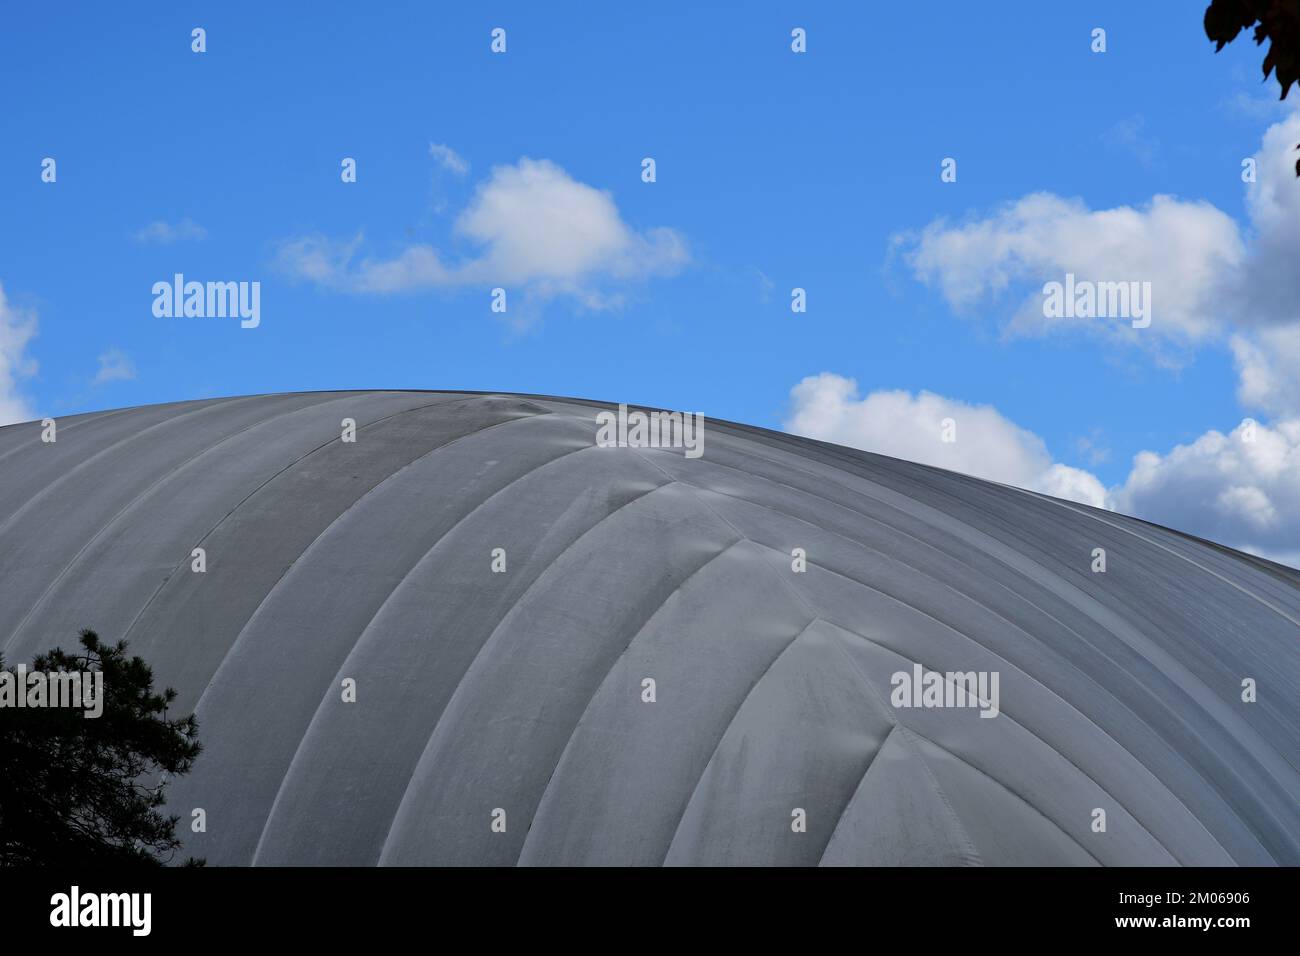 Air-supported seasonal tennis court grey dome against a blue sky. Stock Photo